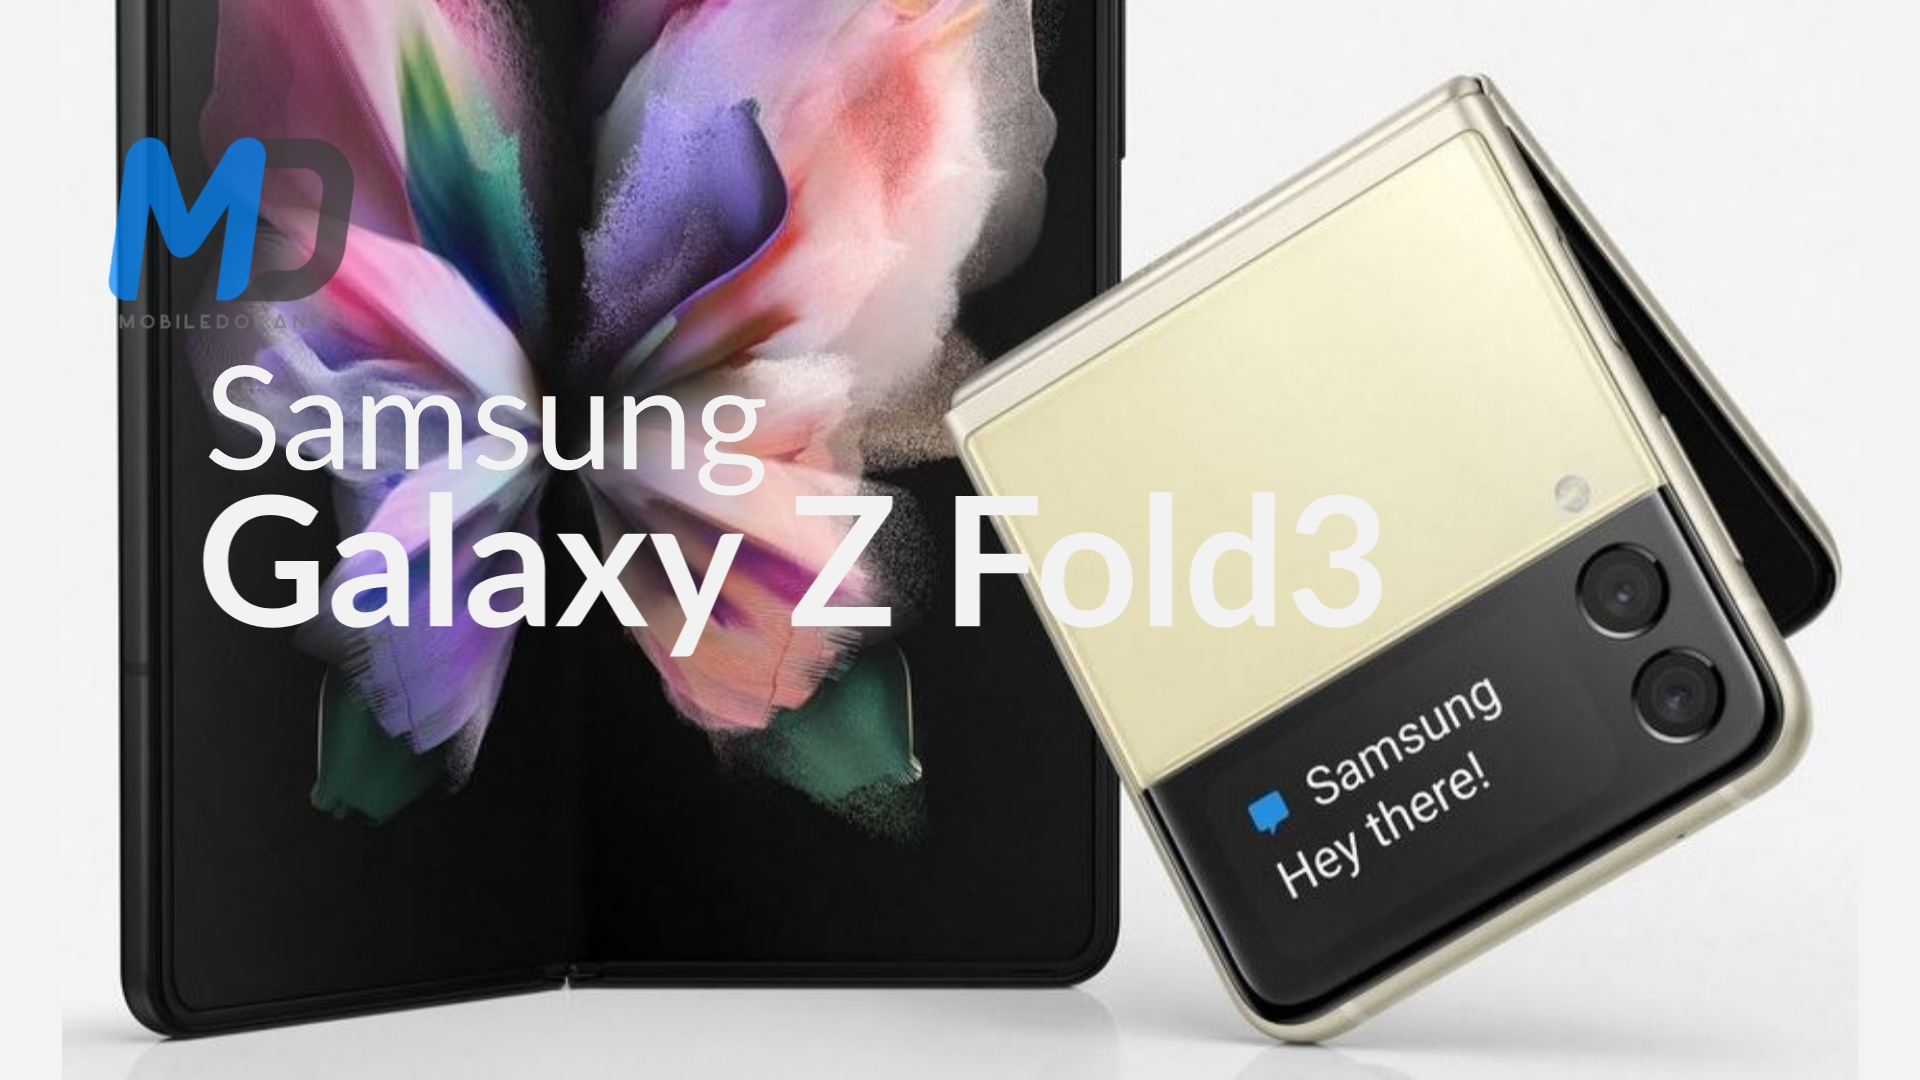 Samsung Galaxy Z Fold3 and its series renders leaked its design